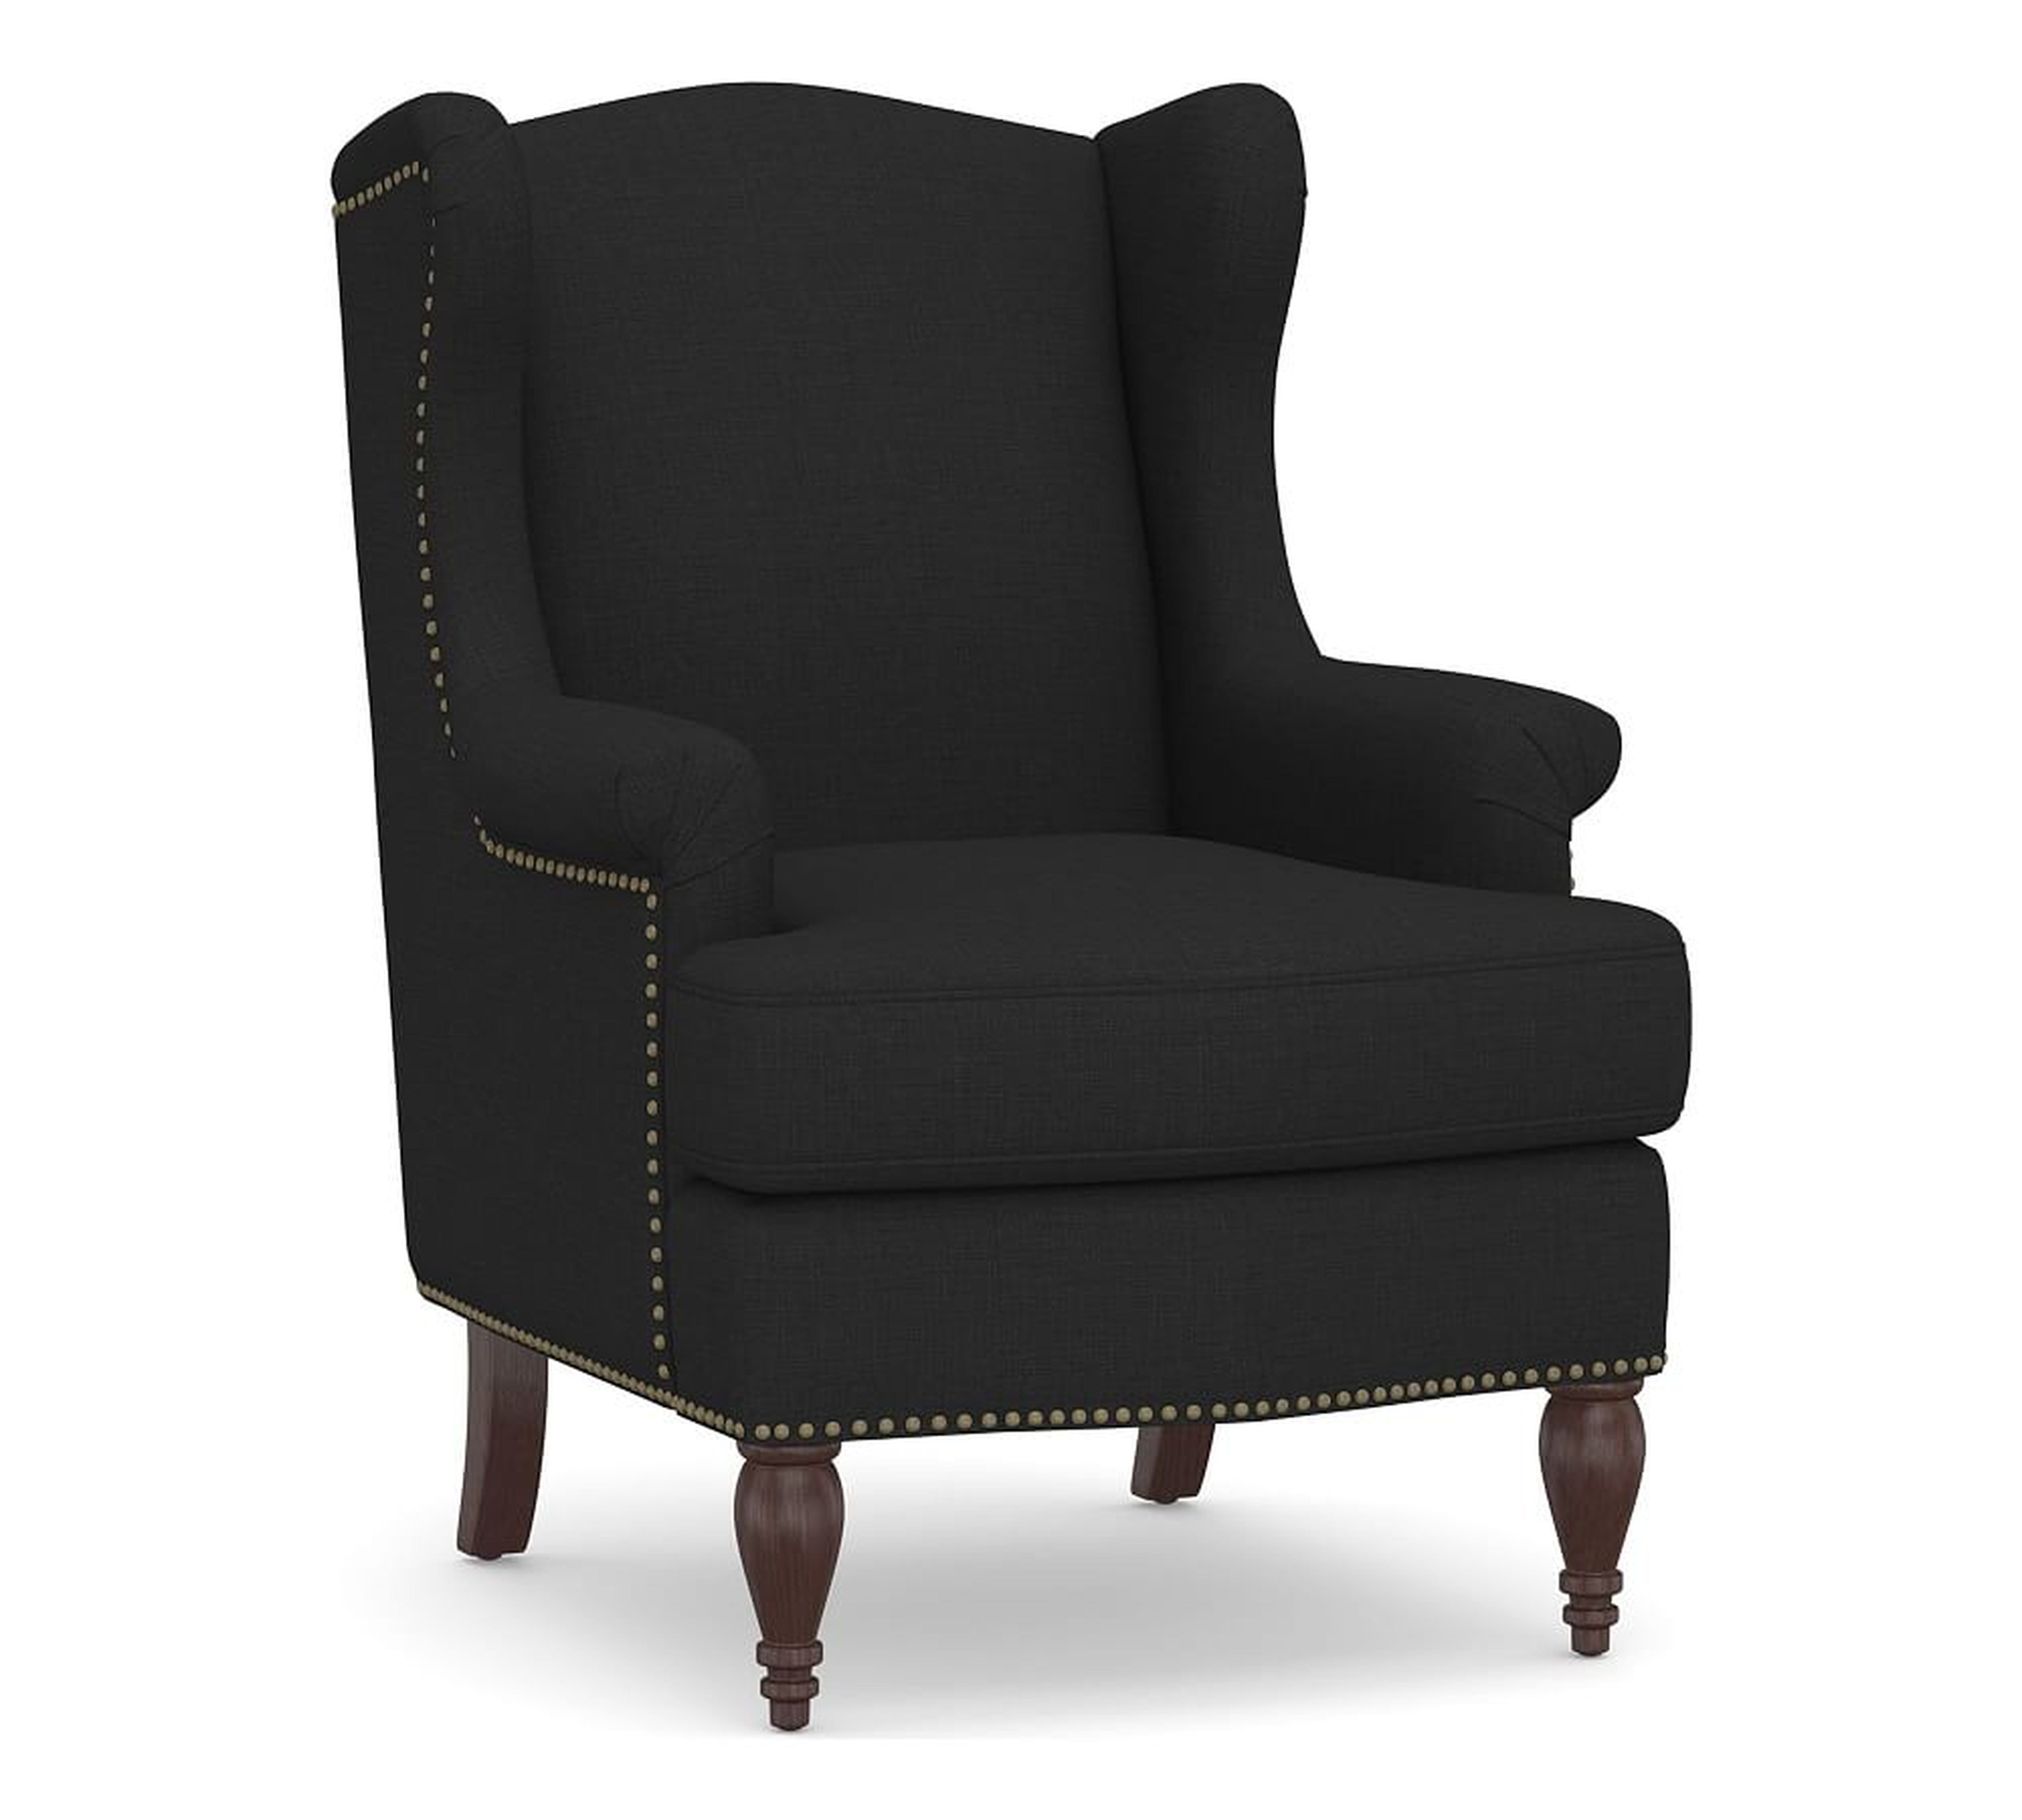 SoMa Delancey Upholstered Wingback Armchair, Polyester Wrapped Cushions, Textured Basketweave Black - Pottery Barn